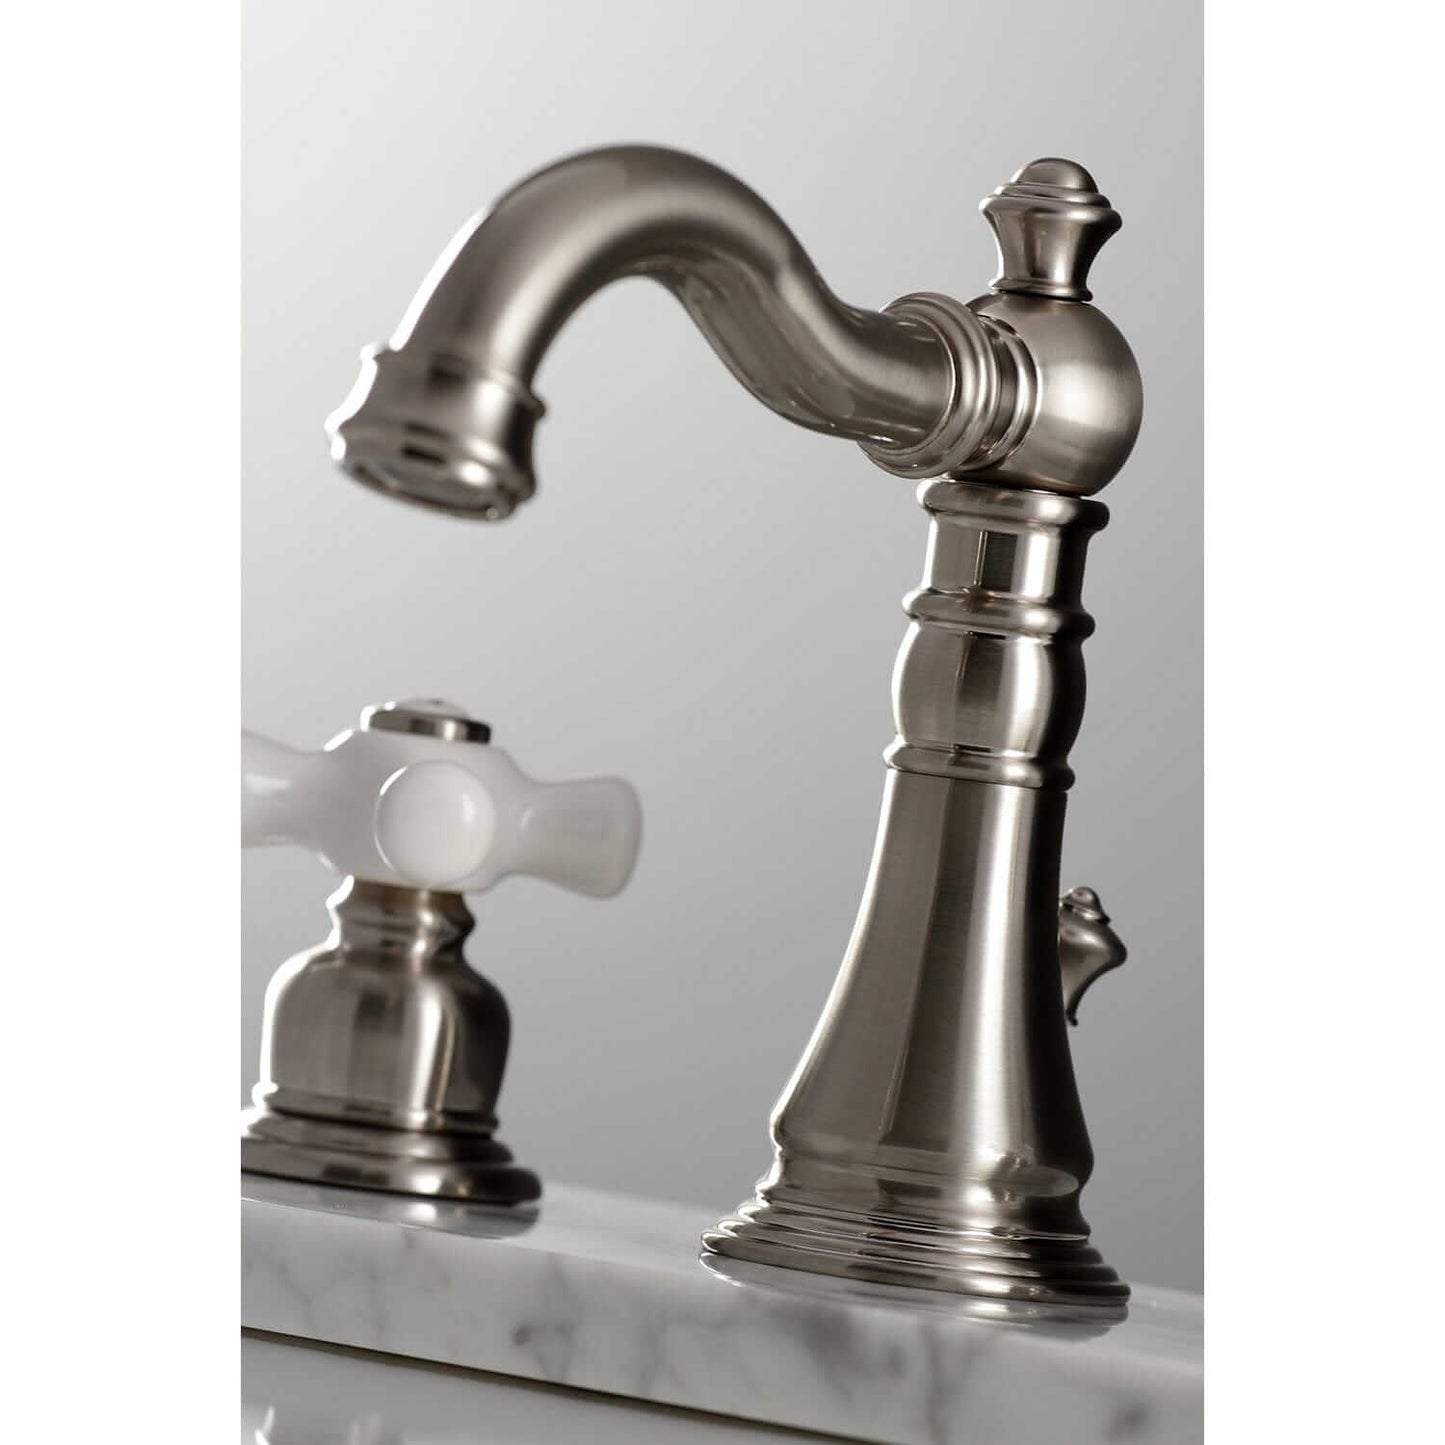 KINGSTON Brass Fauceture American Classic Widespread Bathroom Faucet - Brushed Nickel